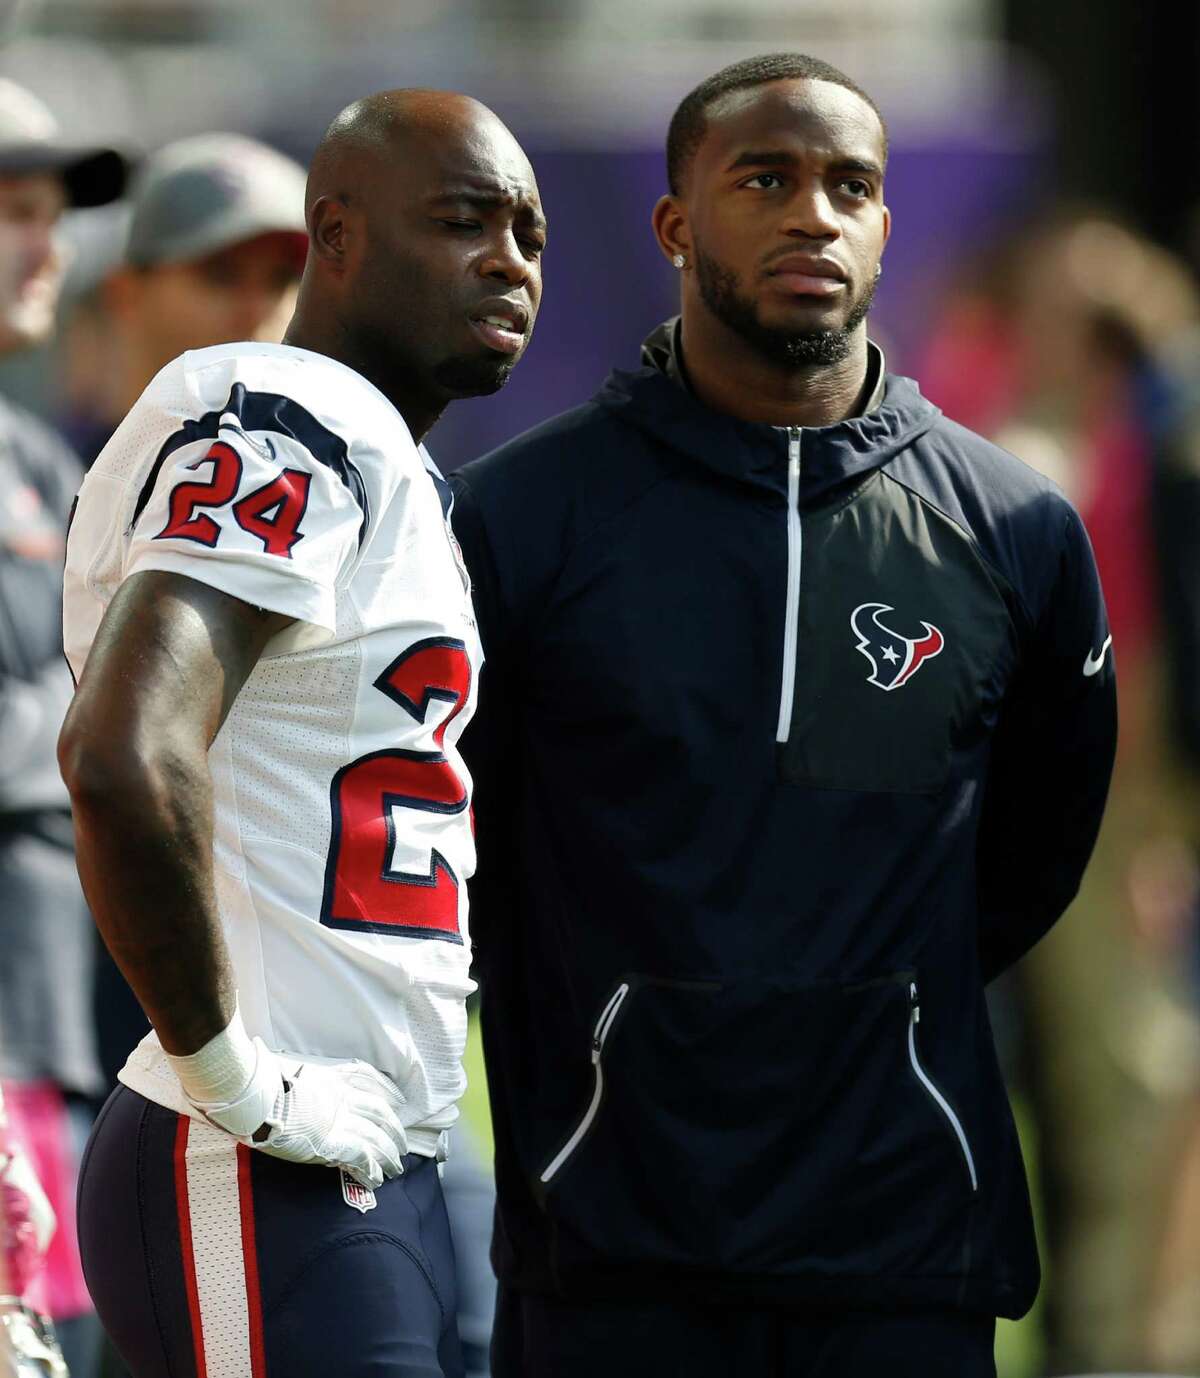 Houston Texans cornerbacks Johnathan Joseph (24) and Kareem Jackson stand on the sidelines during the second quarter of an NFL football game against the Minnesota Vikings at U.S. Bank Stadium on Sunday, Oct. 9, 2016, in Minneapolis.